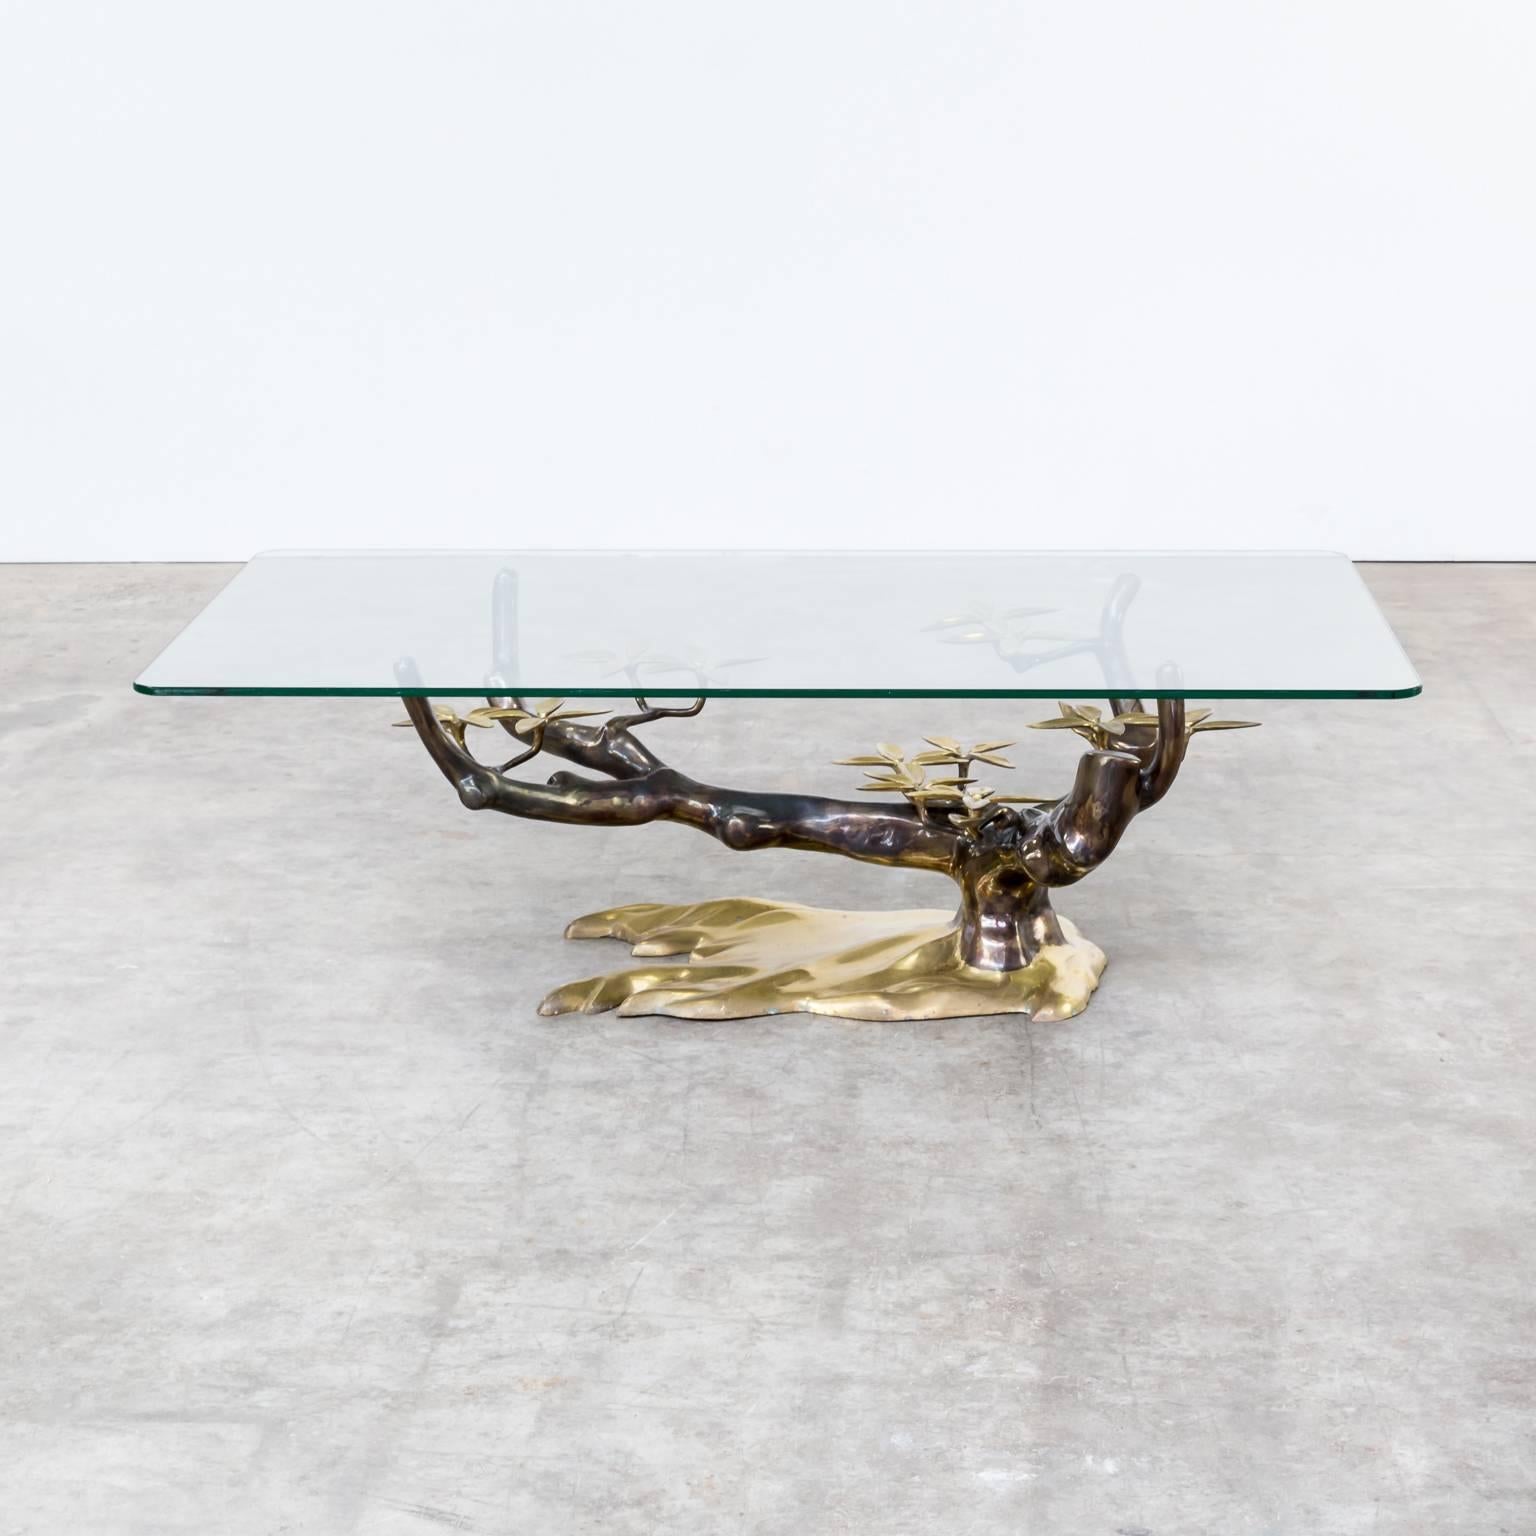 1970s Willy Daro ‘bonsai’ sculptural coffee table. Brass, bronze, glass, gold highlights. Beautifully detailed table. Very good condition of the sculpture. Wear consistent with age and use, small usage spurs on the glass. Dimensions: 129cm (W) x